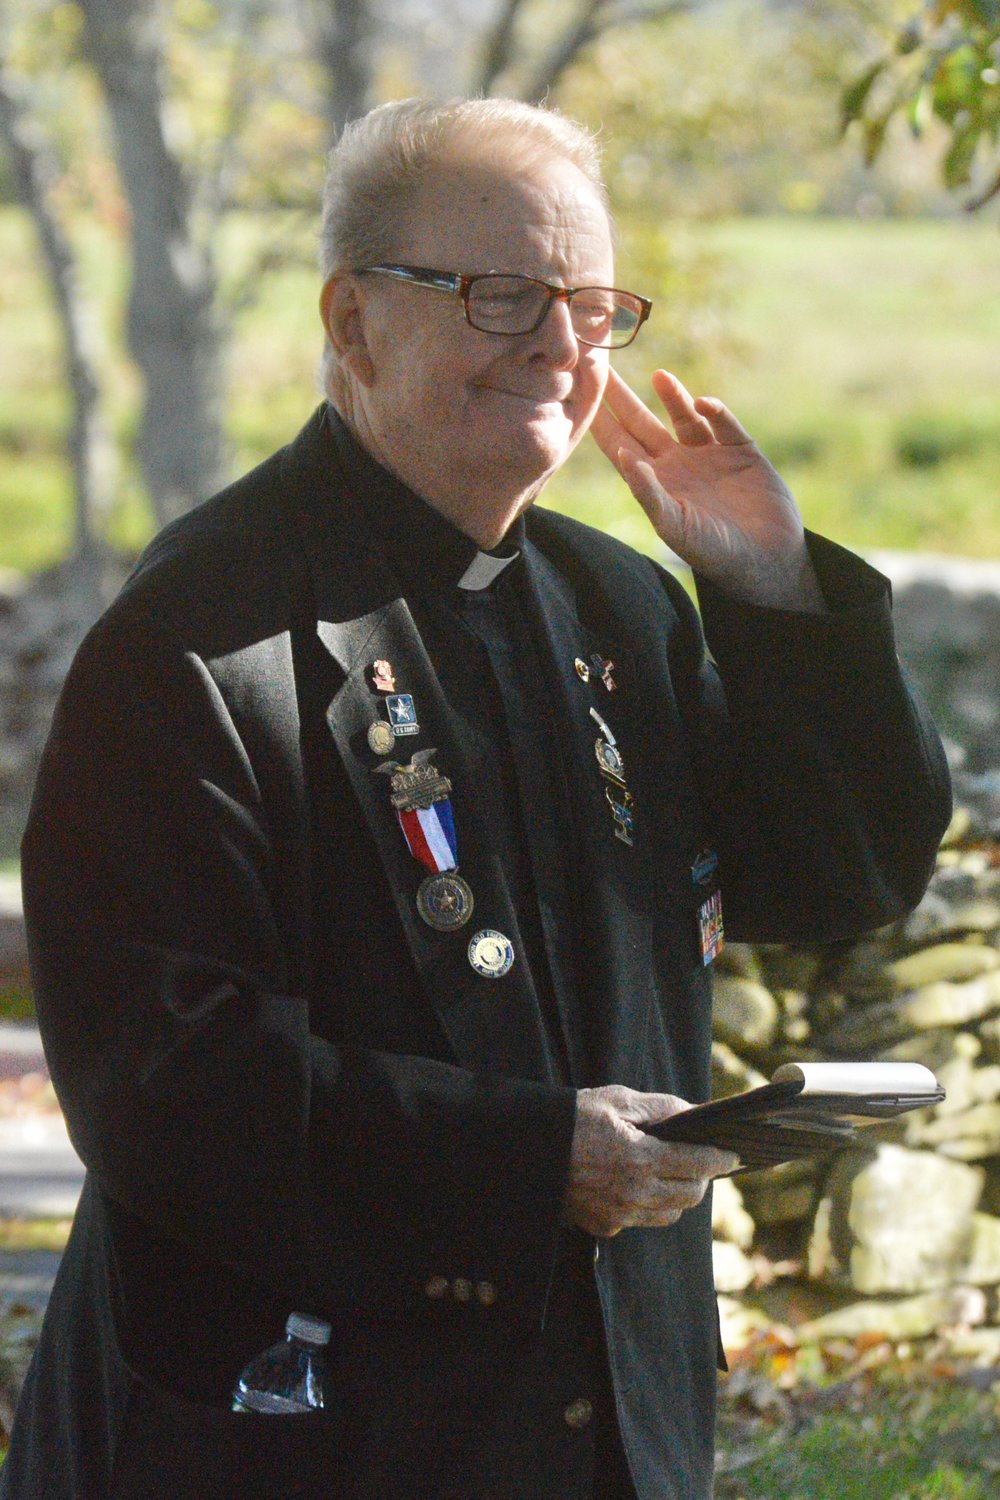 The Rev. Philip G. Salois cups his ear as a plane flies overhead before his invocation. “Who arranged for the flyby?” joked Father Salois, a Vietnam veteran who gave the opening prayer in the U.S. House of Representatives in February 2019.